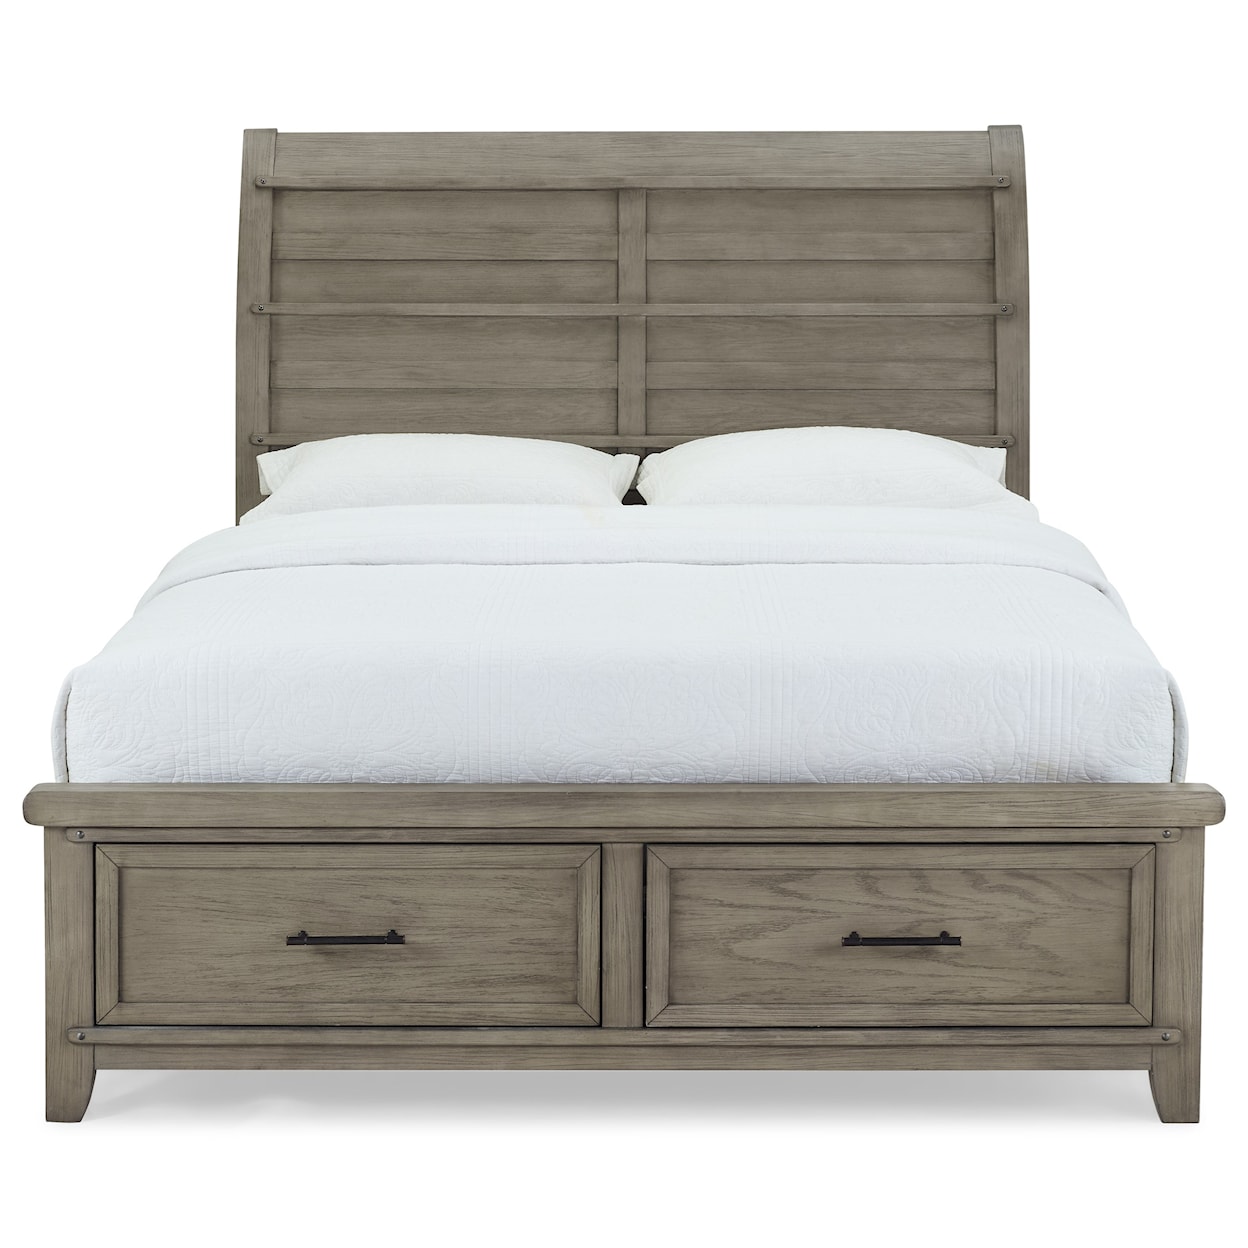 New Classic Fairfax County Queen Sleigh Storage Bed